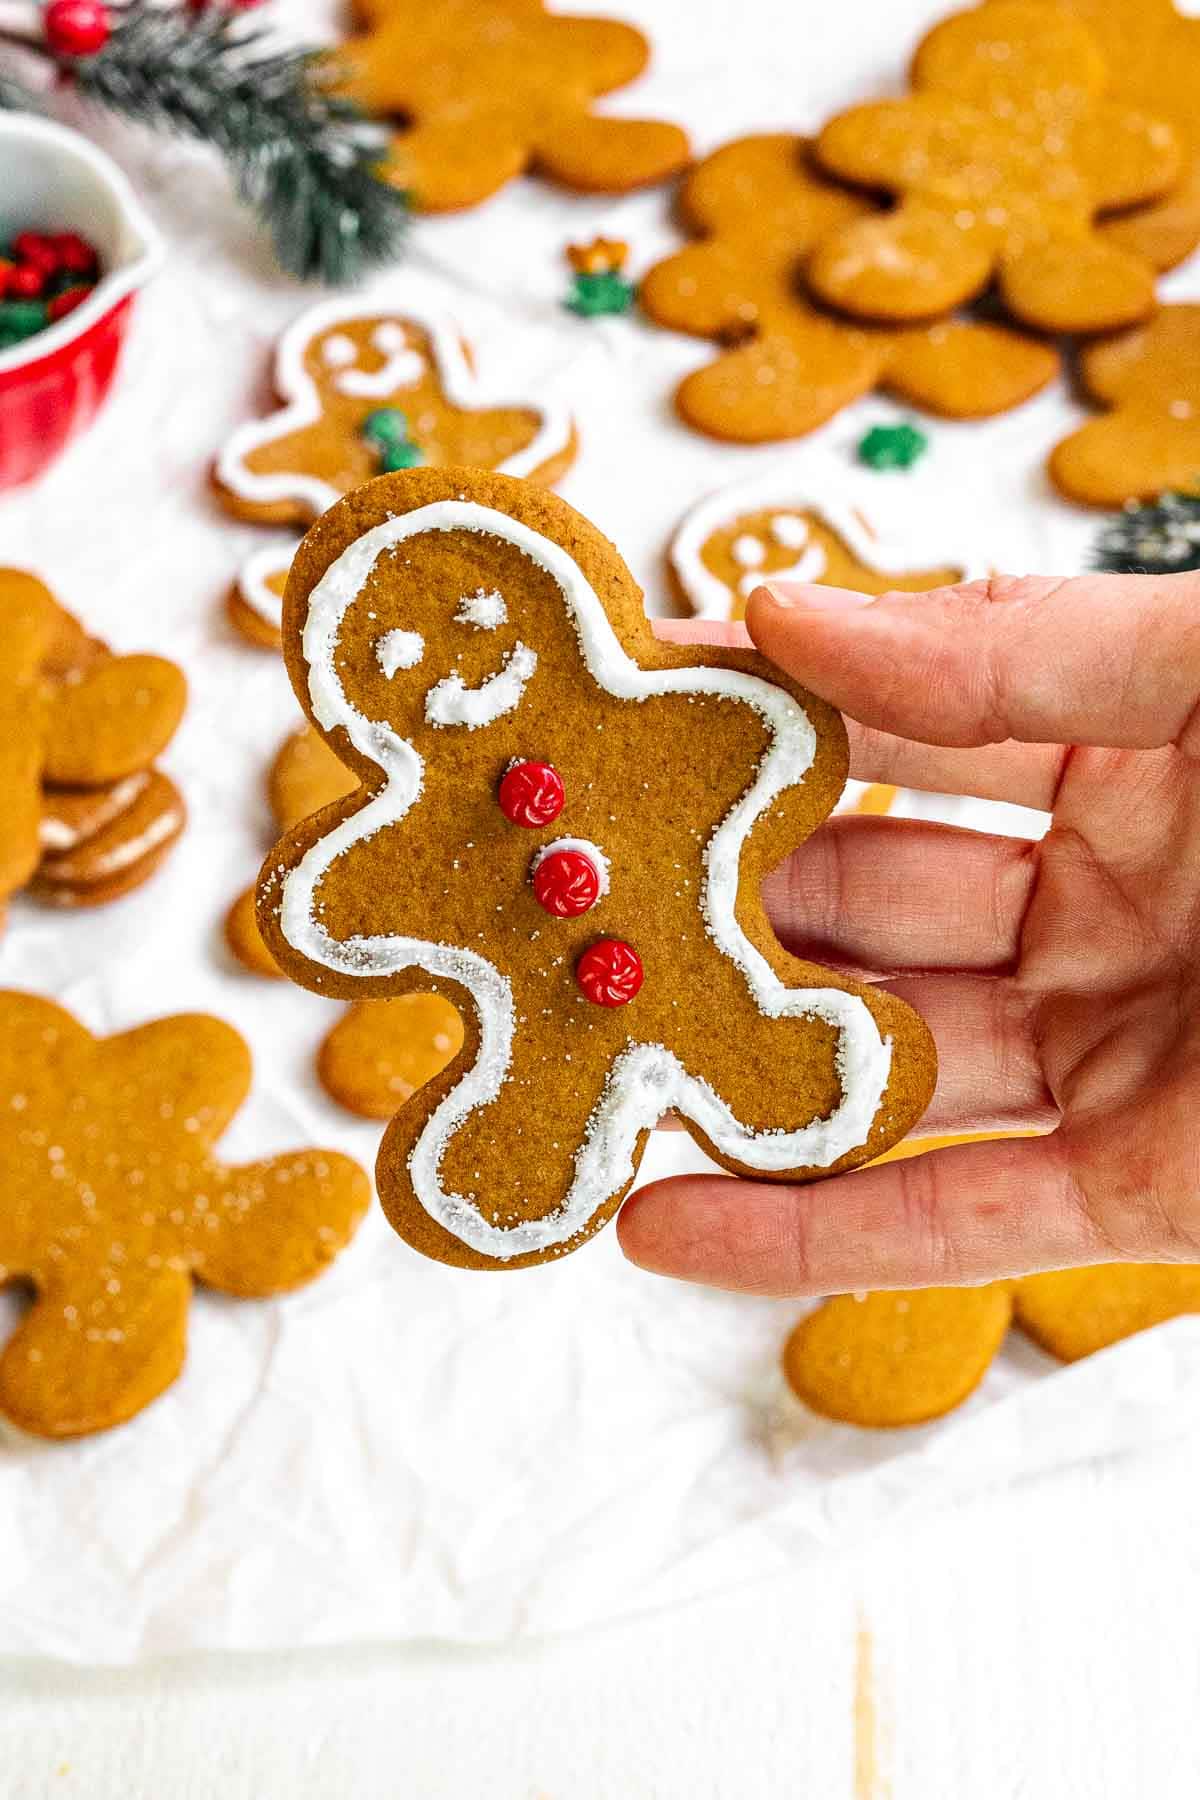 Decorated Gingerbread Man Cookie.